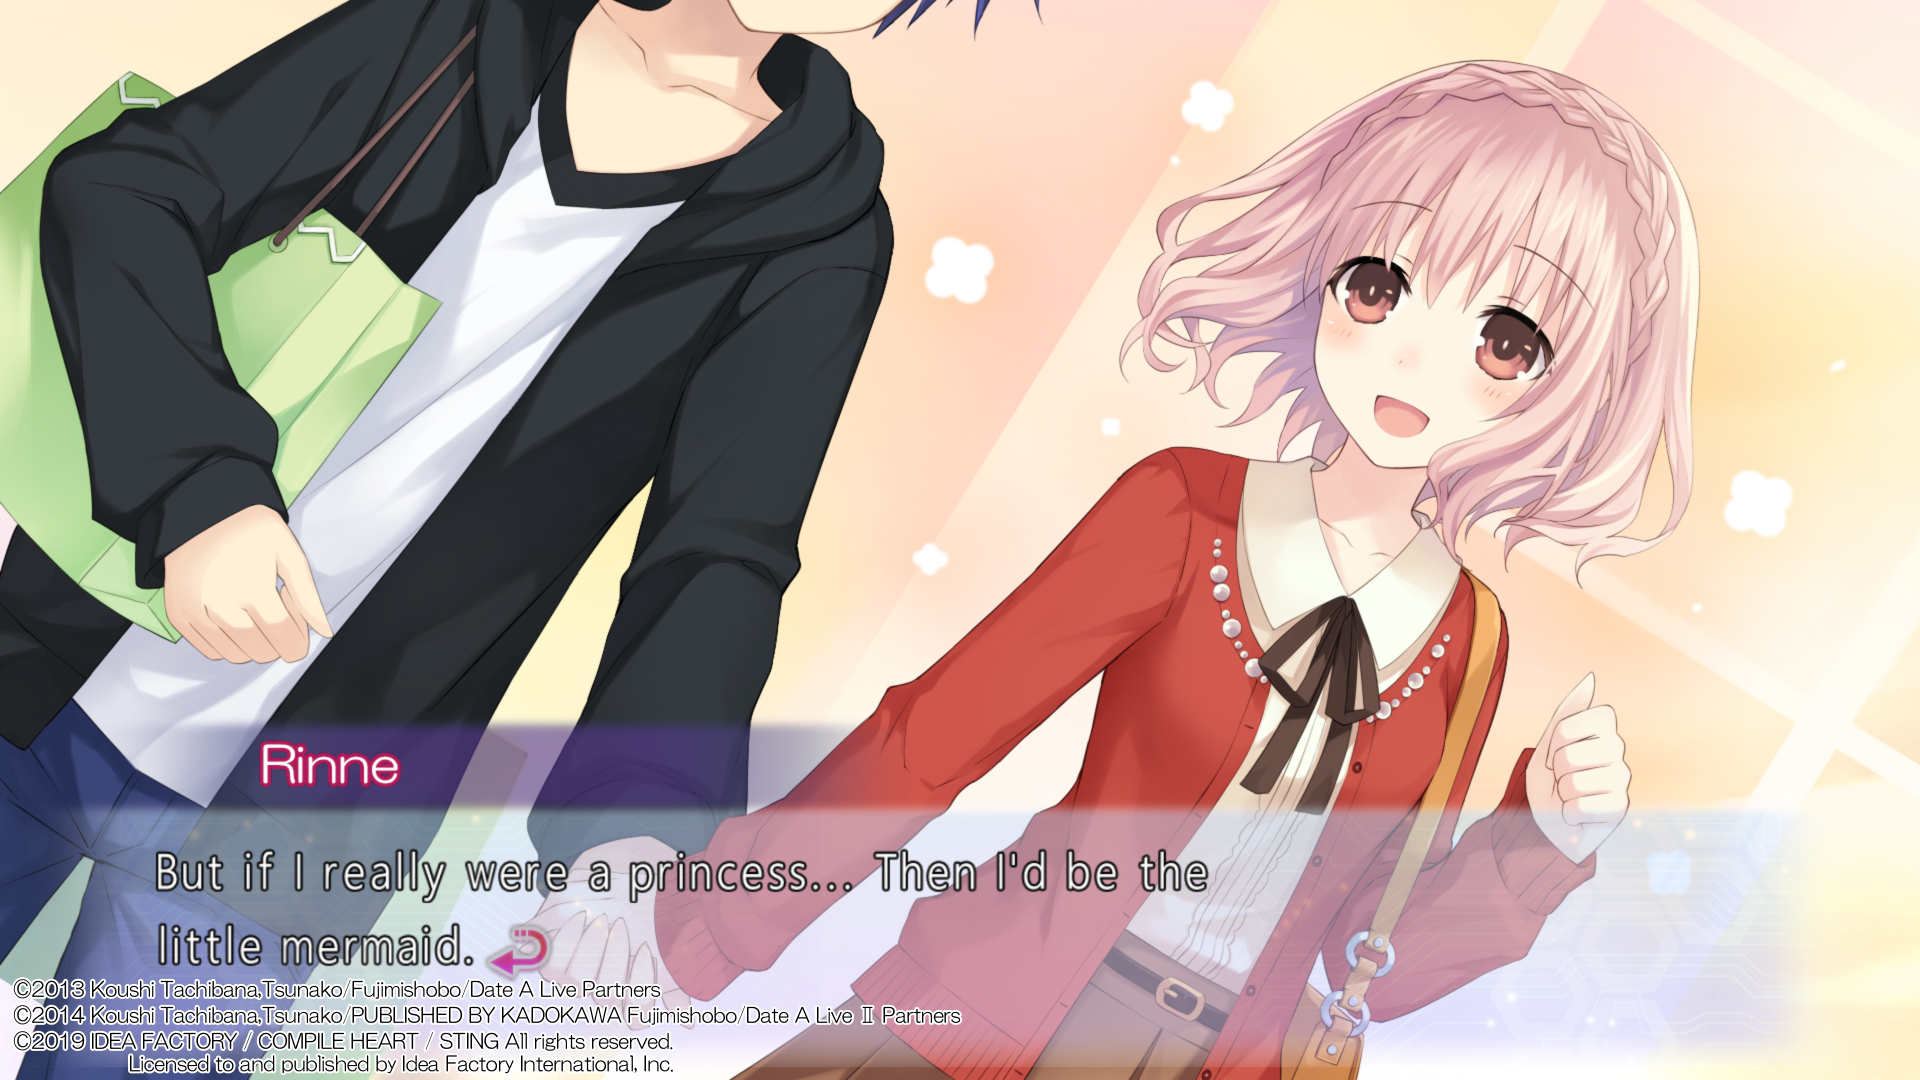 Date A Live: Rio Reincarnation Is A Dating Sim Where You Never